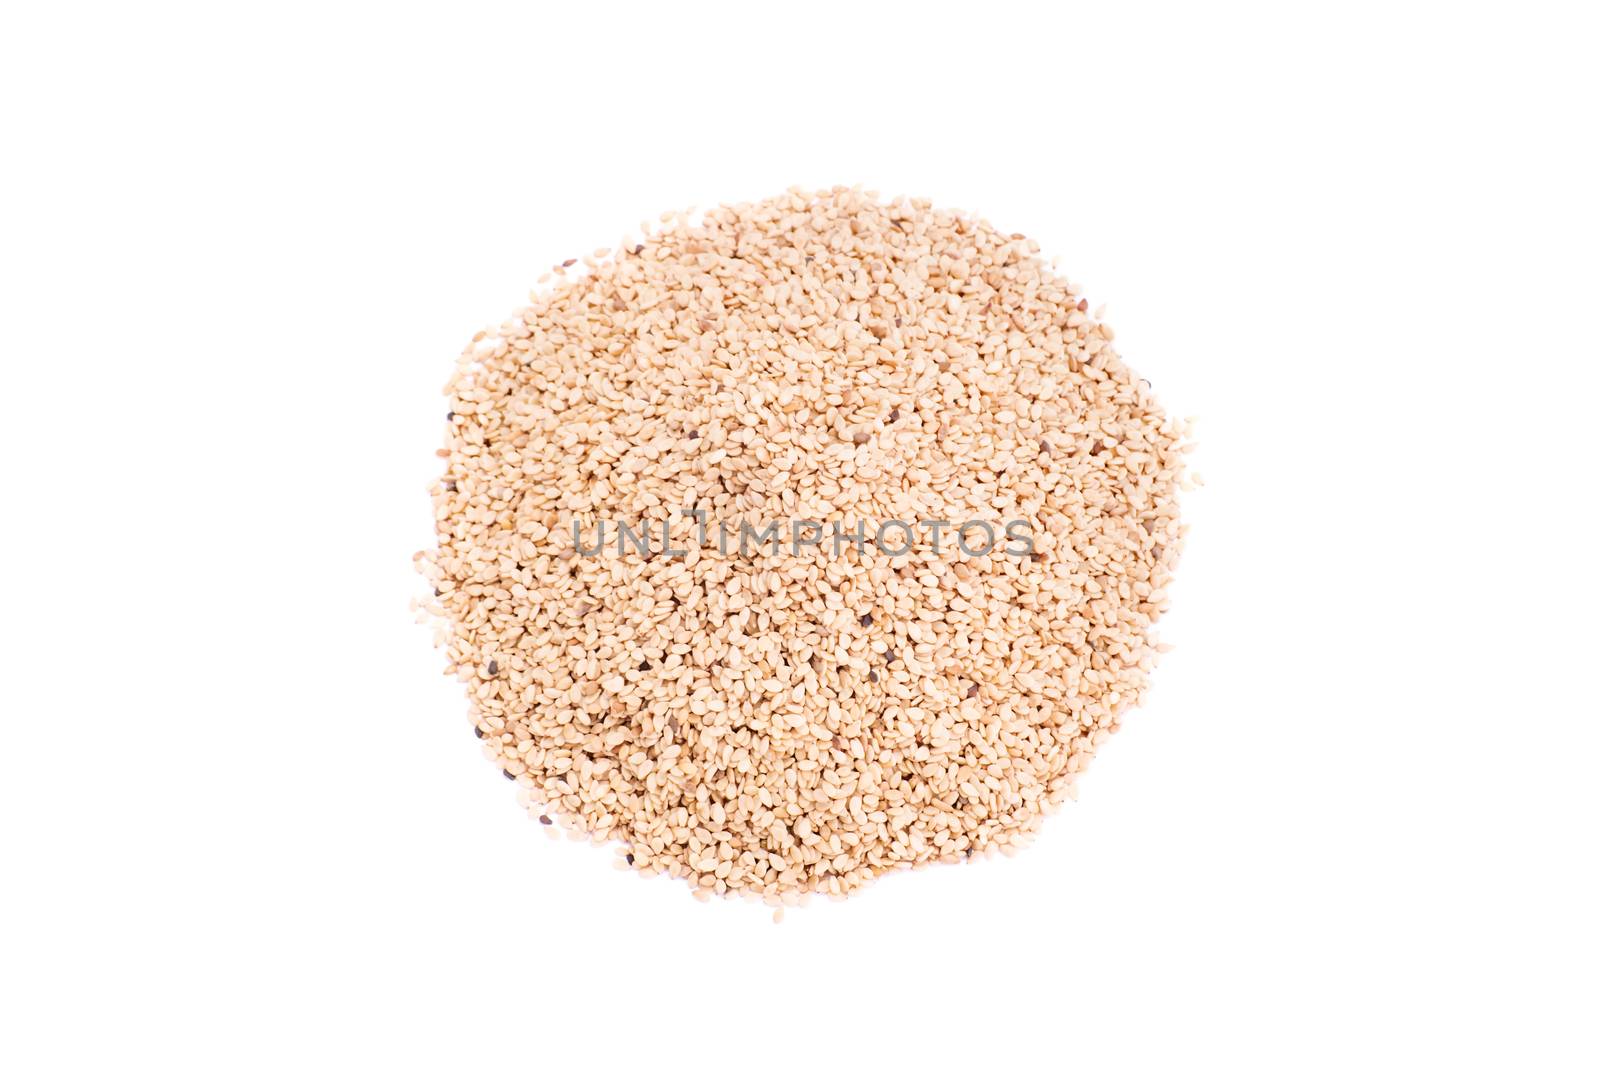 Top perspective of a heap of sesame seeds, isolated on white background.